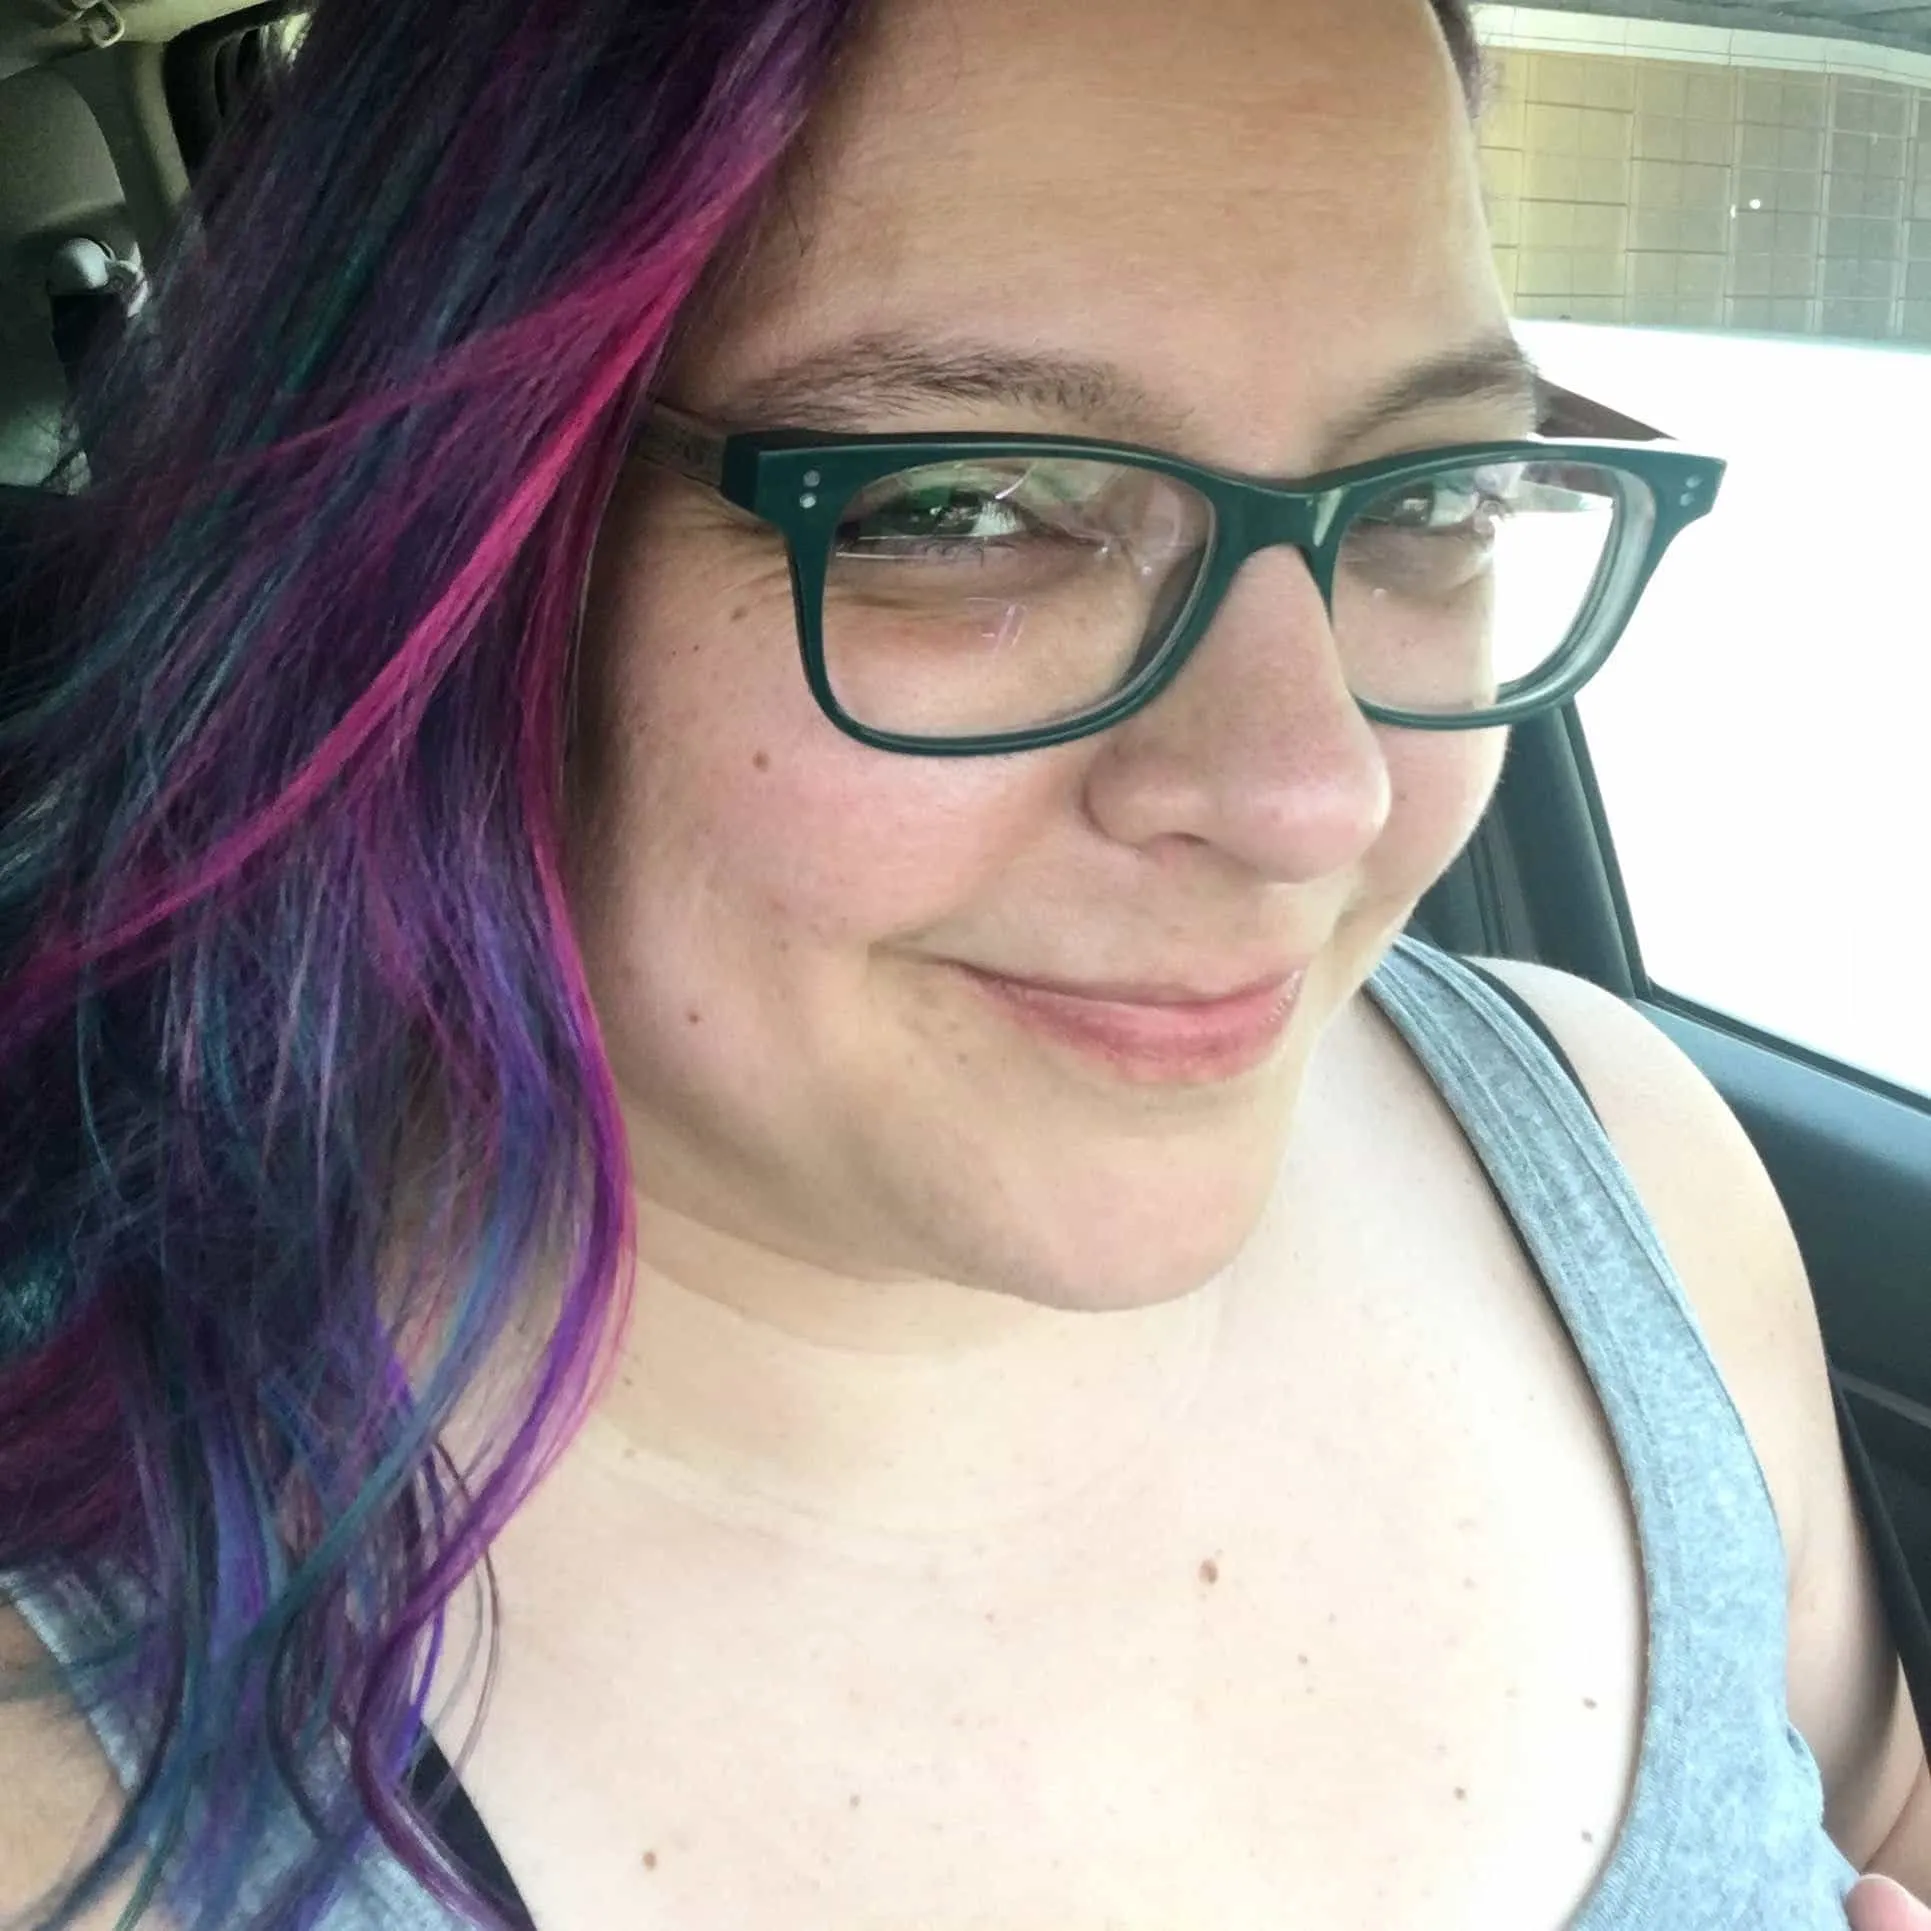 Woman with brown eyes, green glasses, and blue, purple, pink, and brown hair stares directly at you with a confident and friendly smirk.